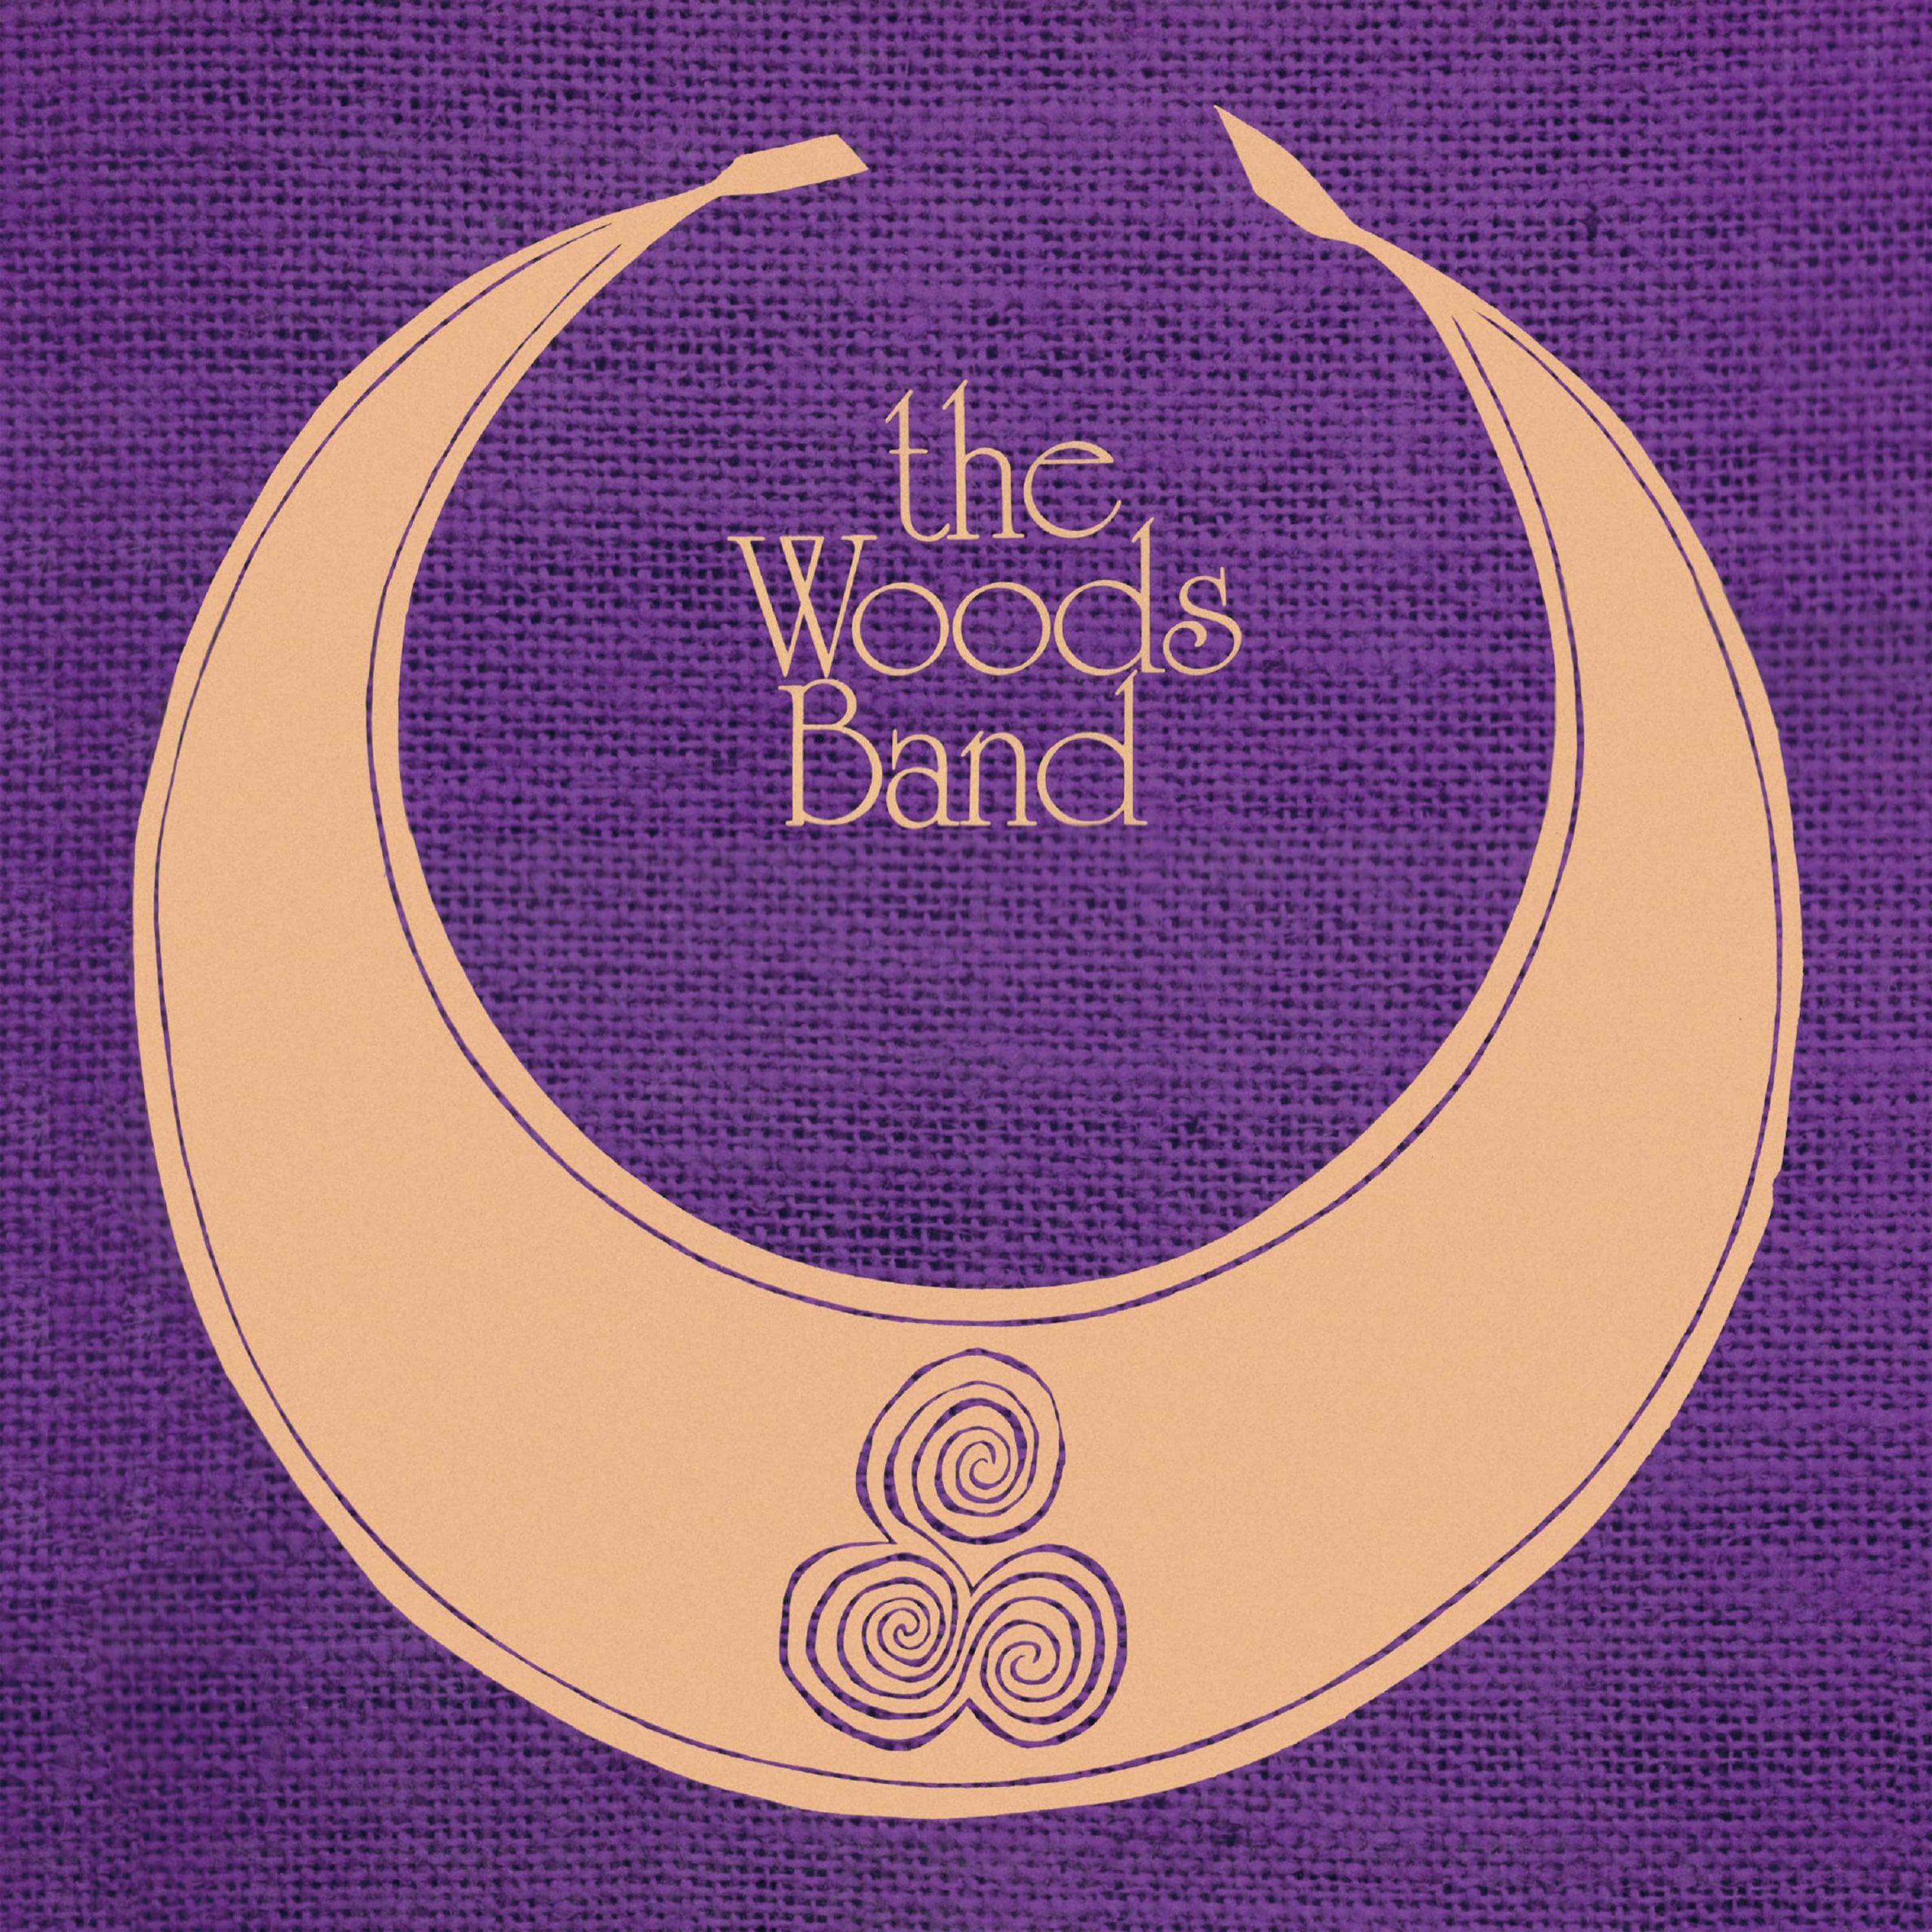 The Woods Band - The Woods Band, Remastered - CD